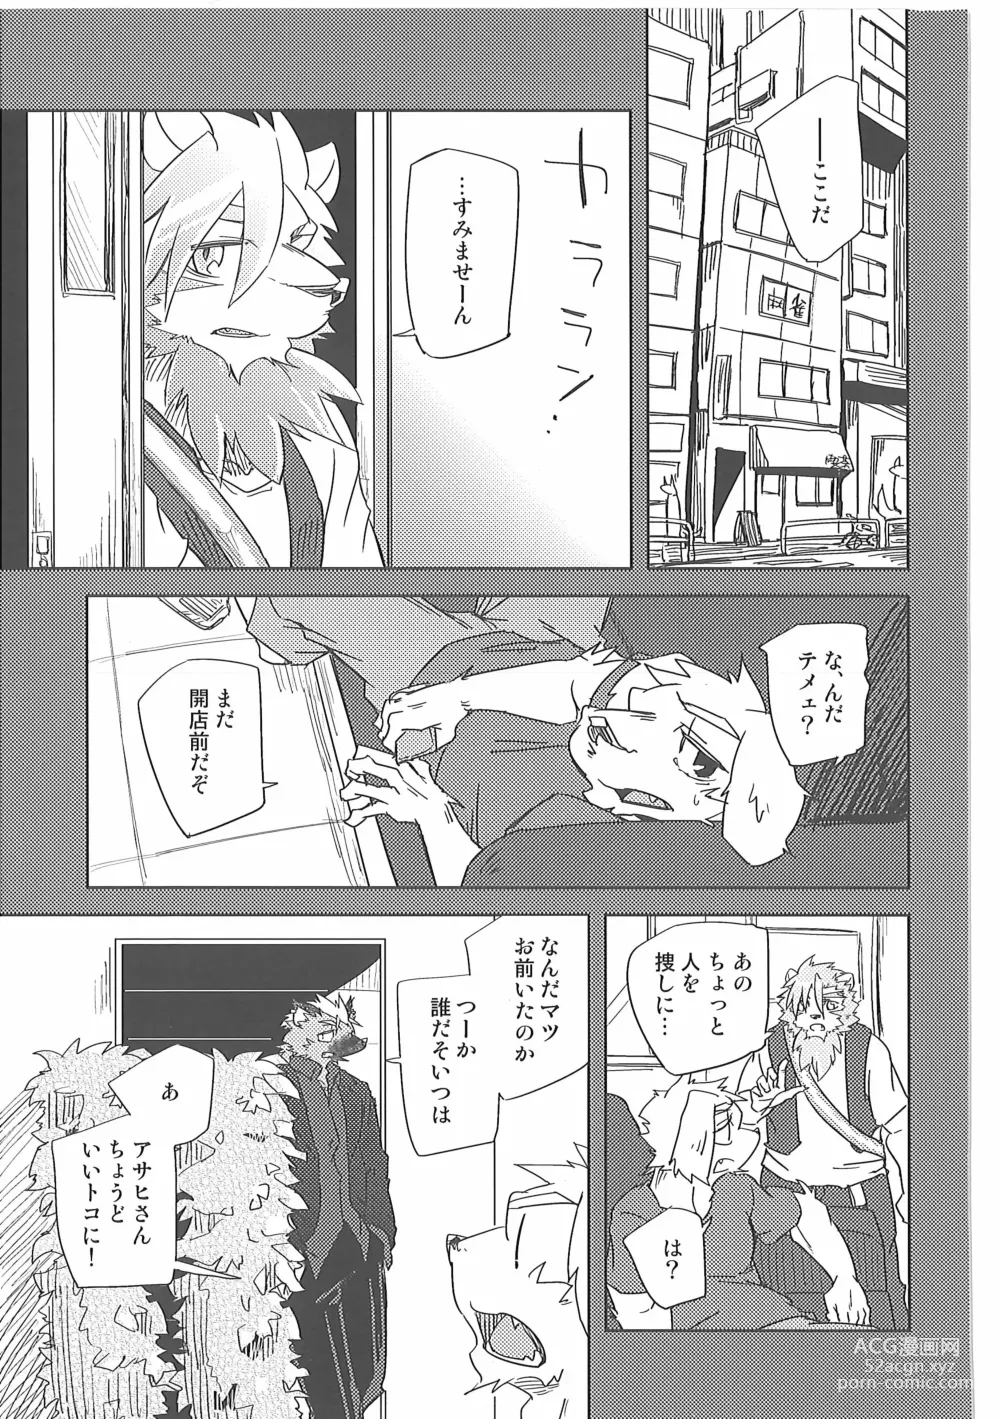 Page 3 of doujinshi Water under The Bridge 2